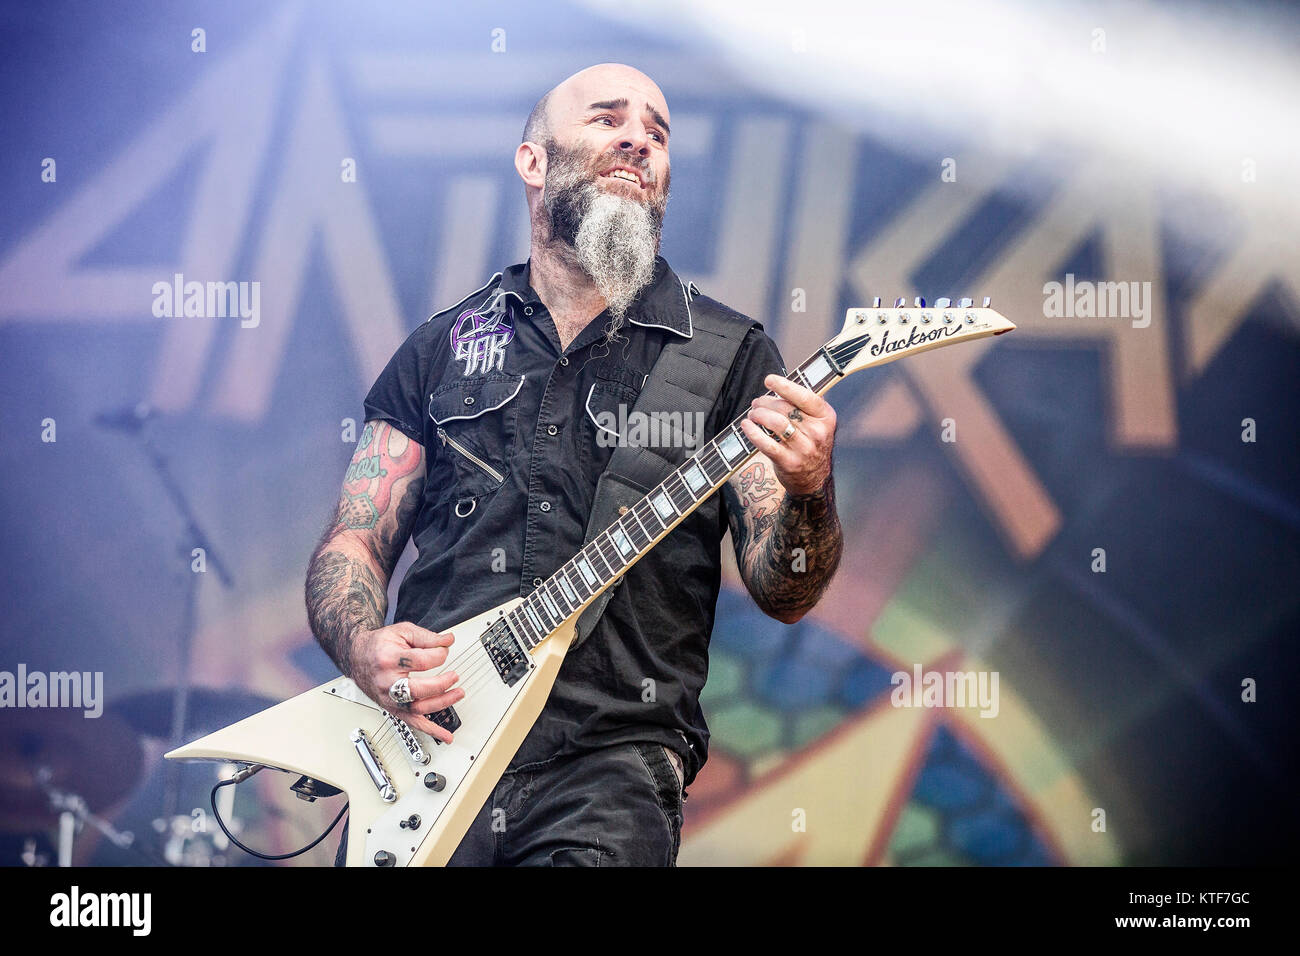 The American thrash metal band Anthrax performs a live concert at the Swedish music festival Sweden Rock Festival 2016. Here guitarist Scott Ian is seen live on stage. Sweden, 11/06 2016. Stock Photo